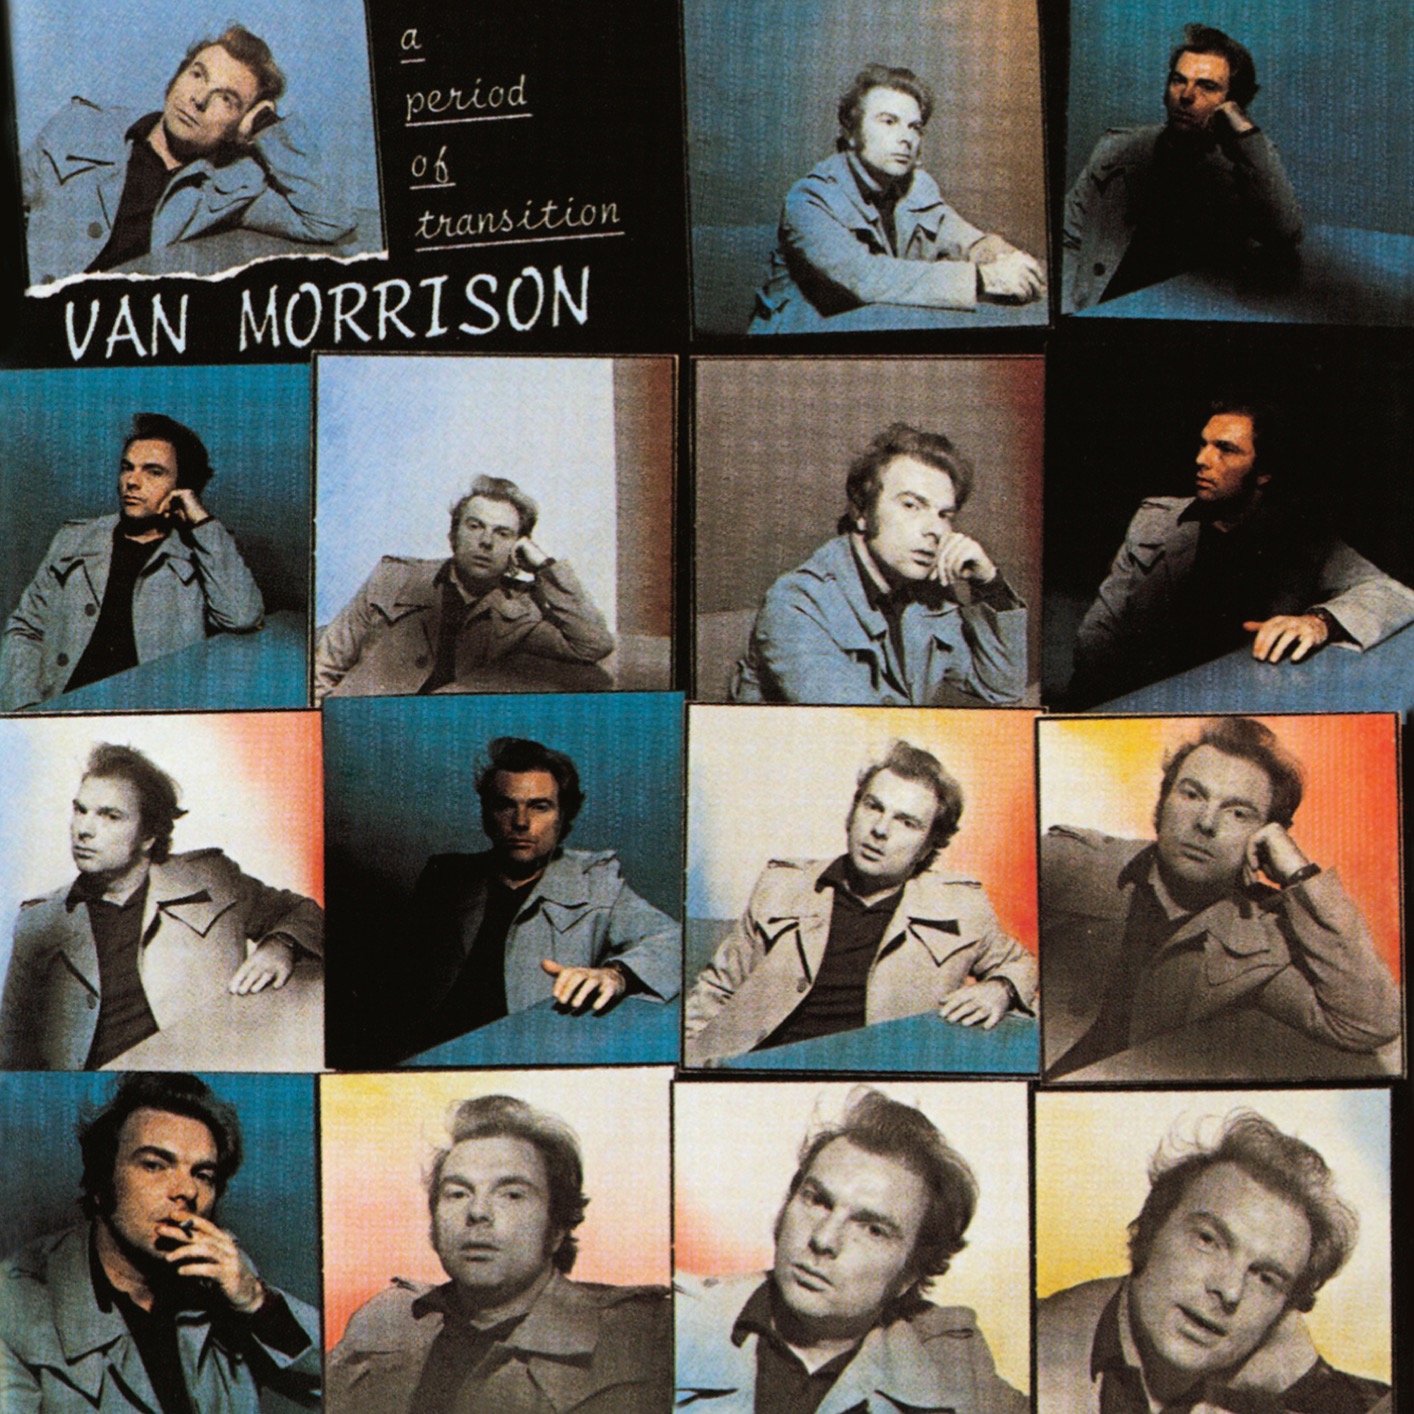 Van Morrison – A Period of Transition (Remastered) (1977/2020) [FLAC 24bit/96kHz]